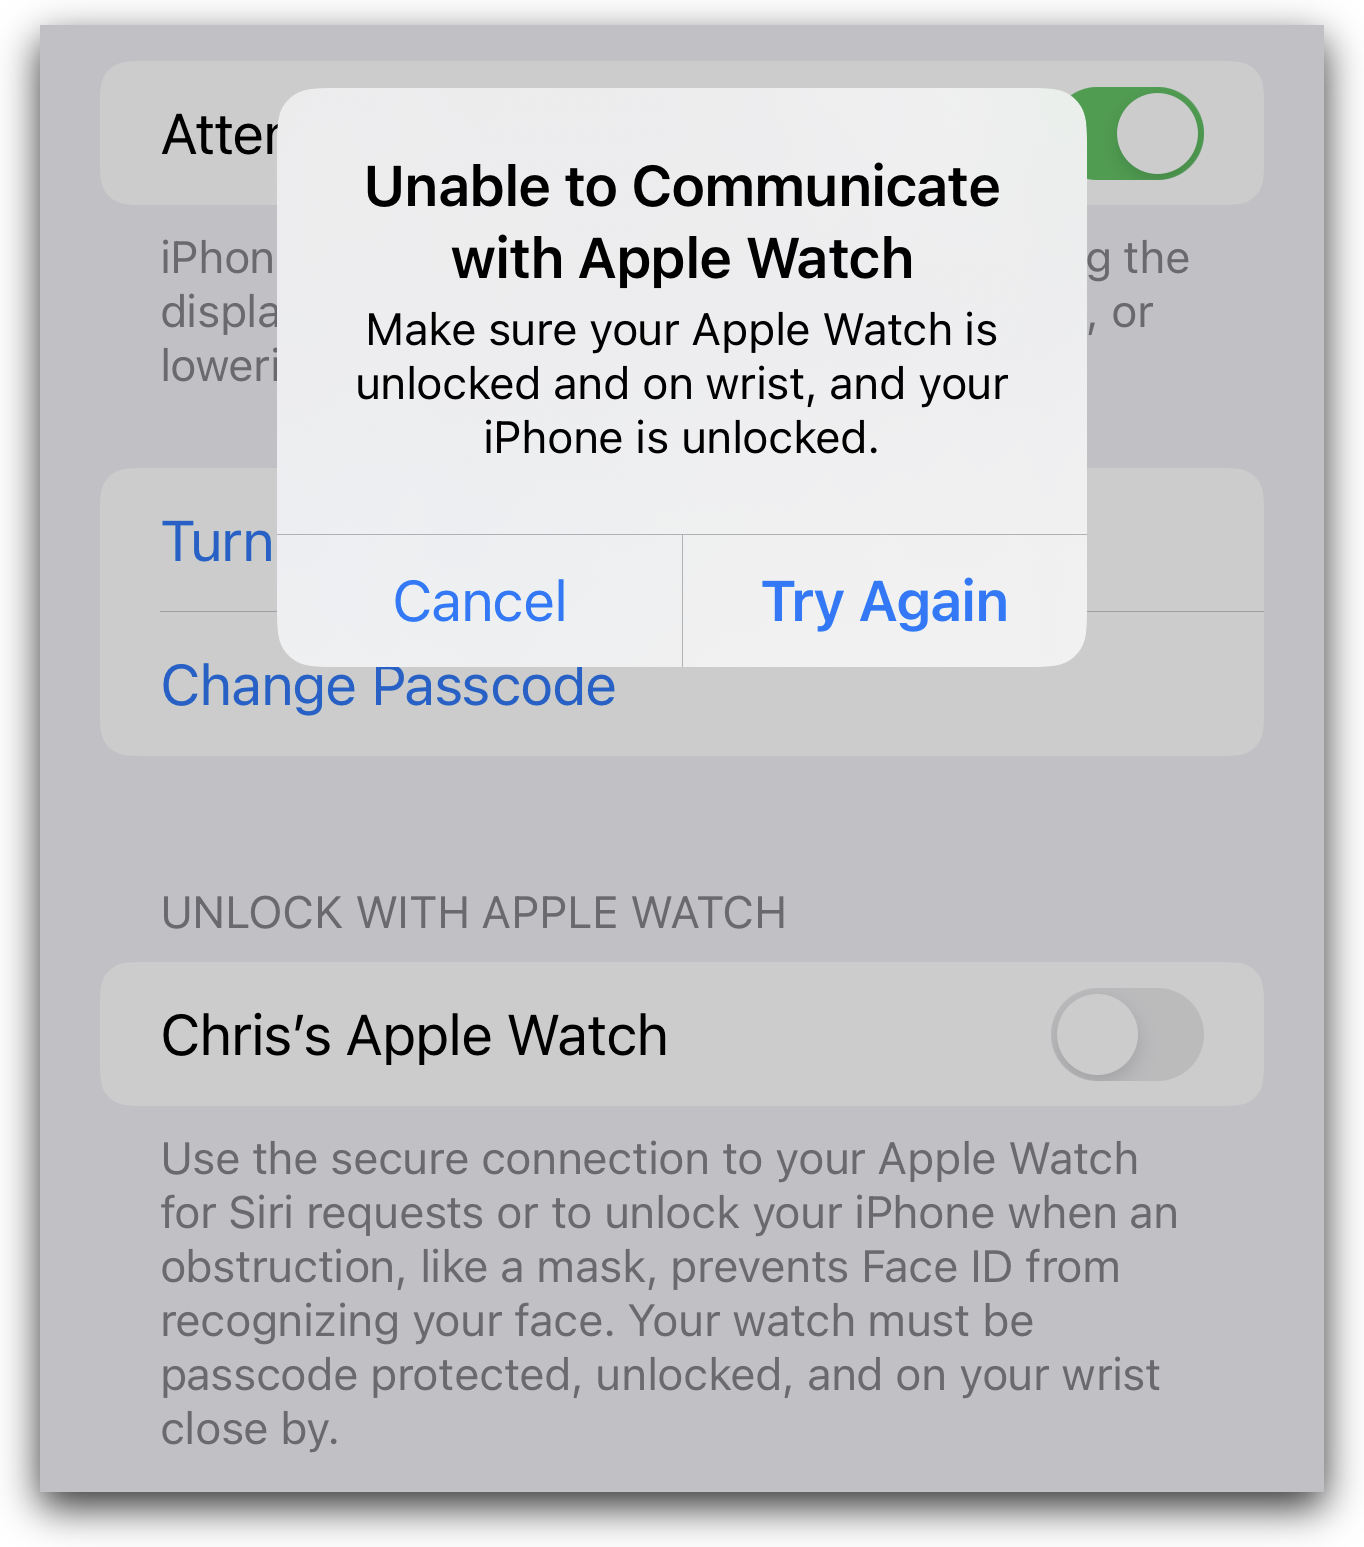 Unable to communicate with Apple Watch error